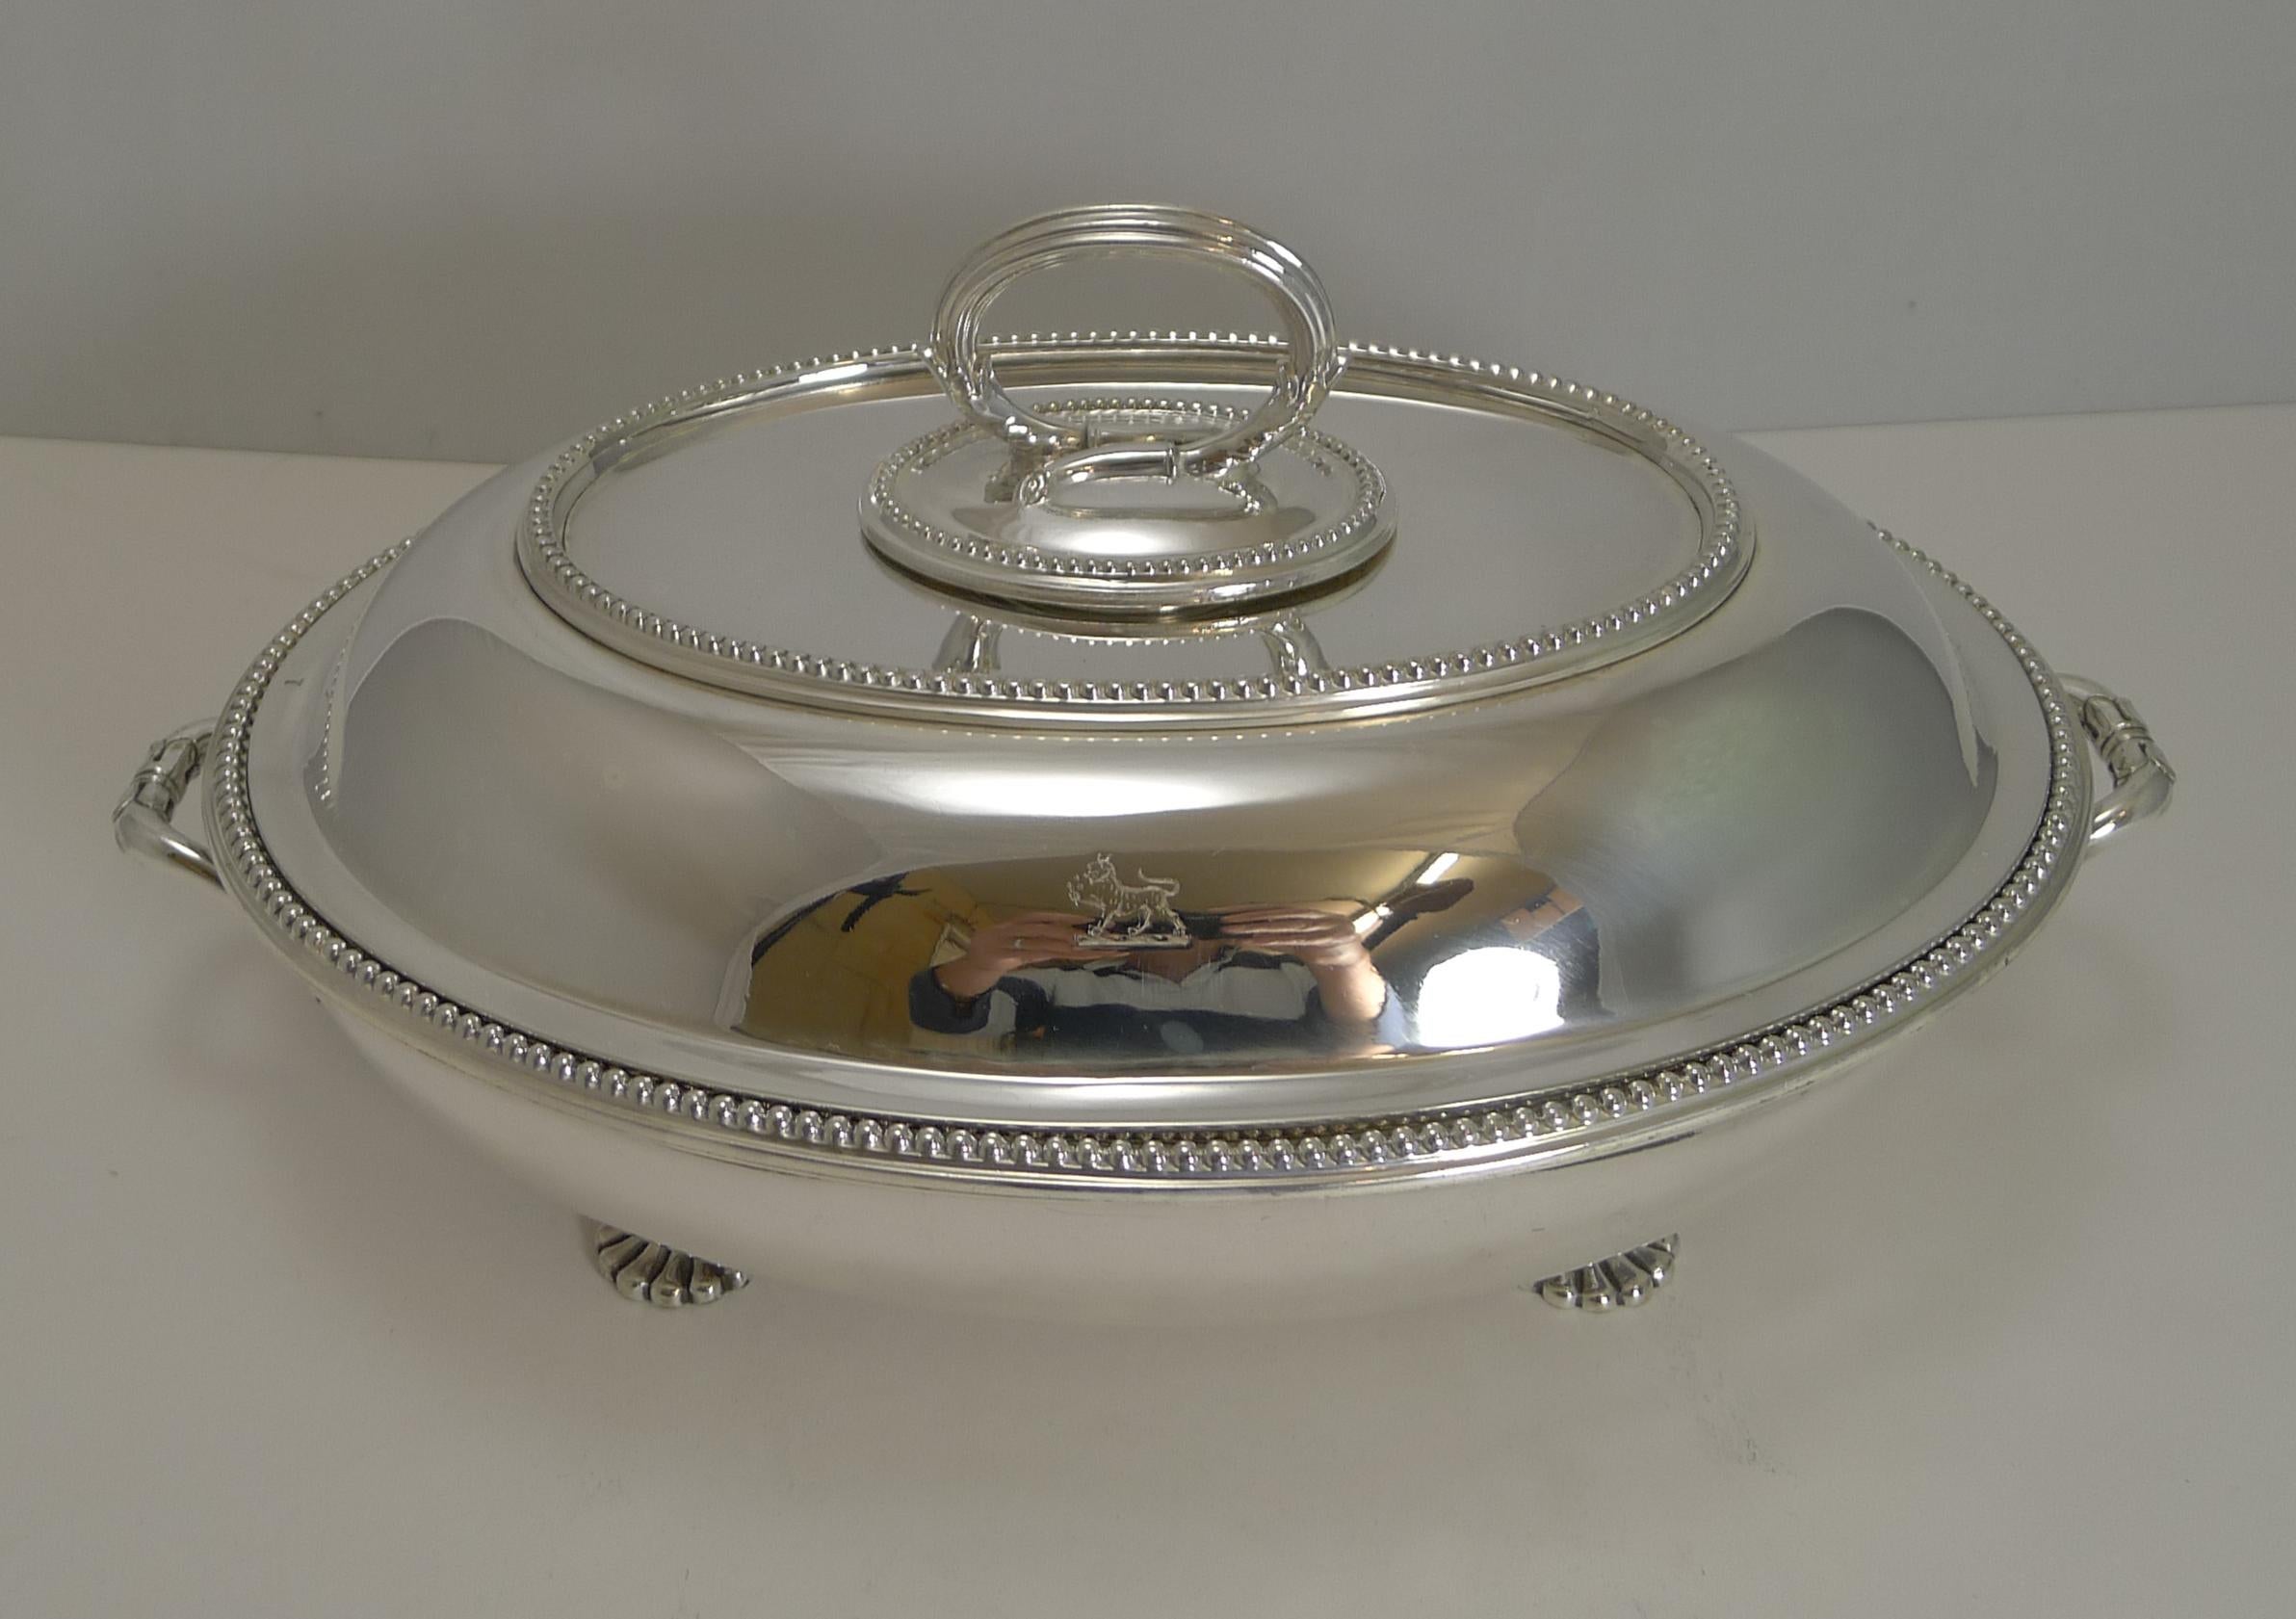 English Antique Entree / Chafing Dishes by Stephen Smith and Son of Covent Garden, Pair